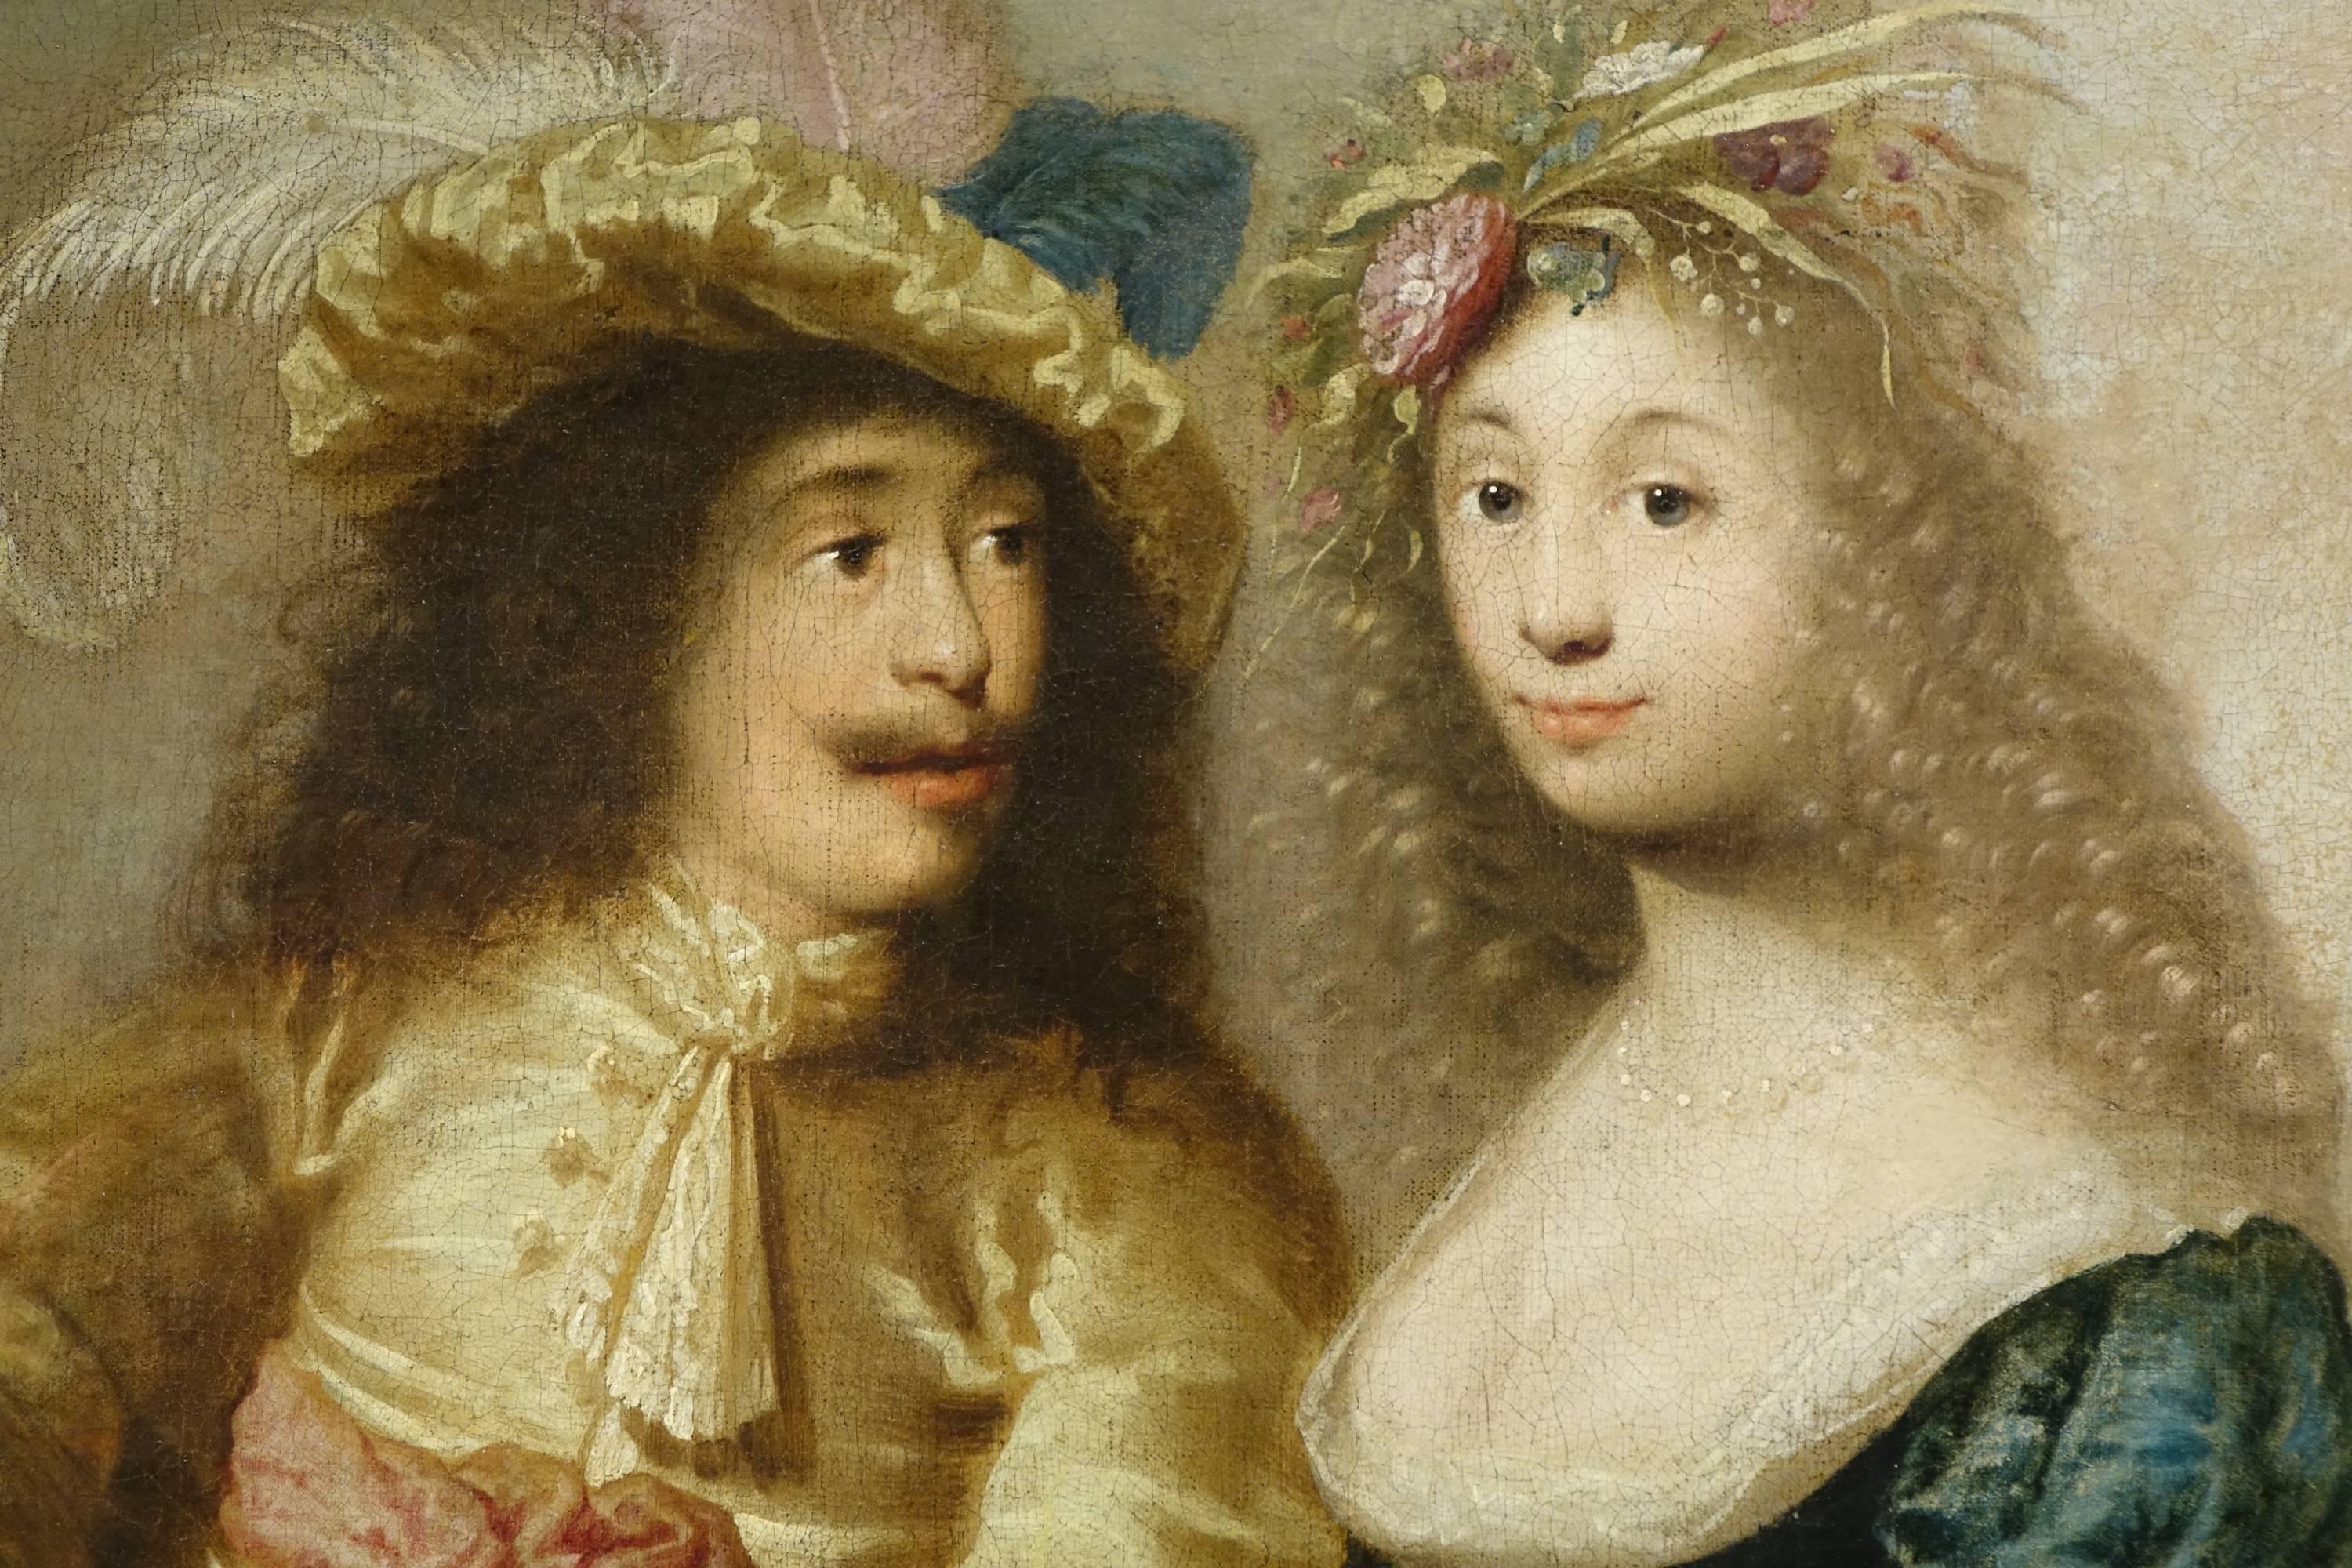 Portrait of a young couple of aristocrats,Flemish School 17th Century Oil on canvas
17th century period frame
